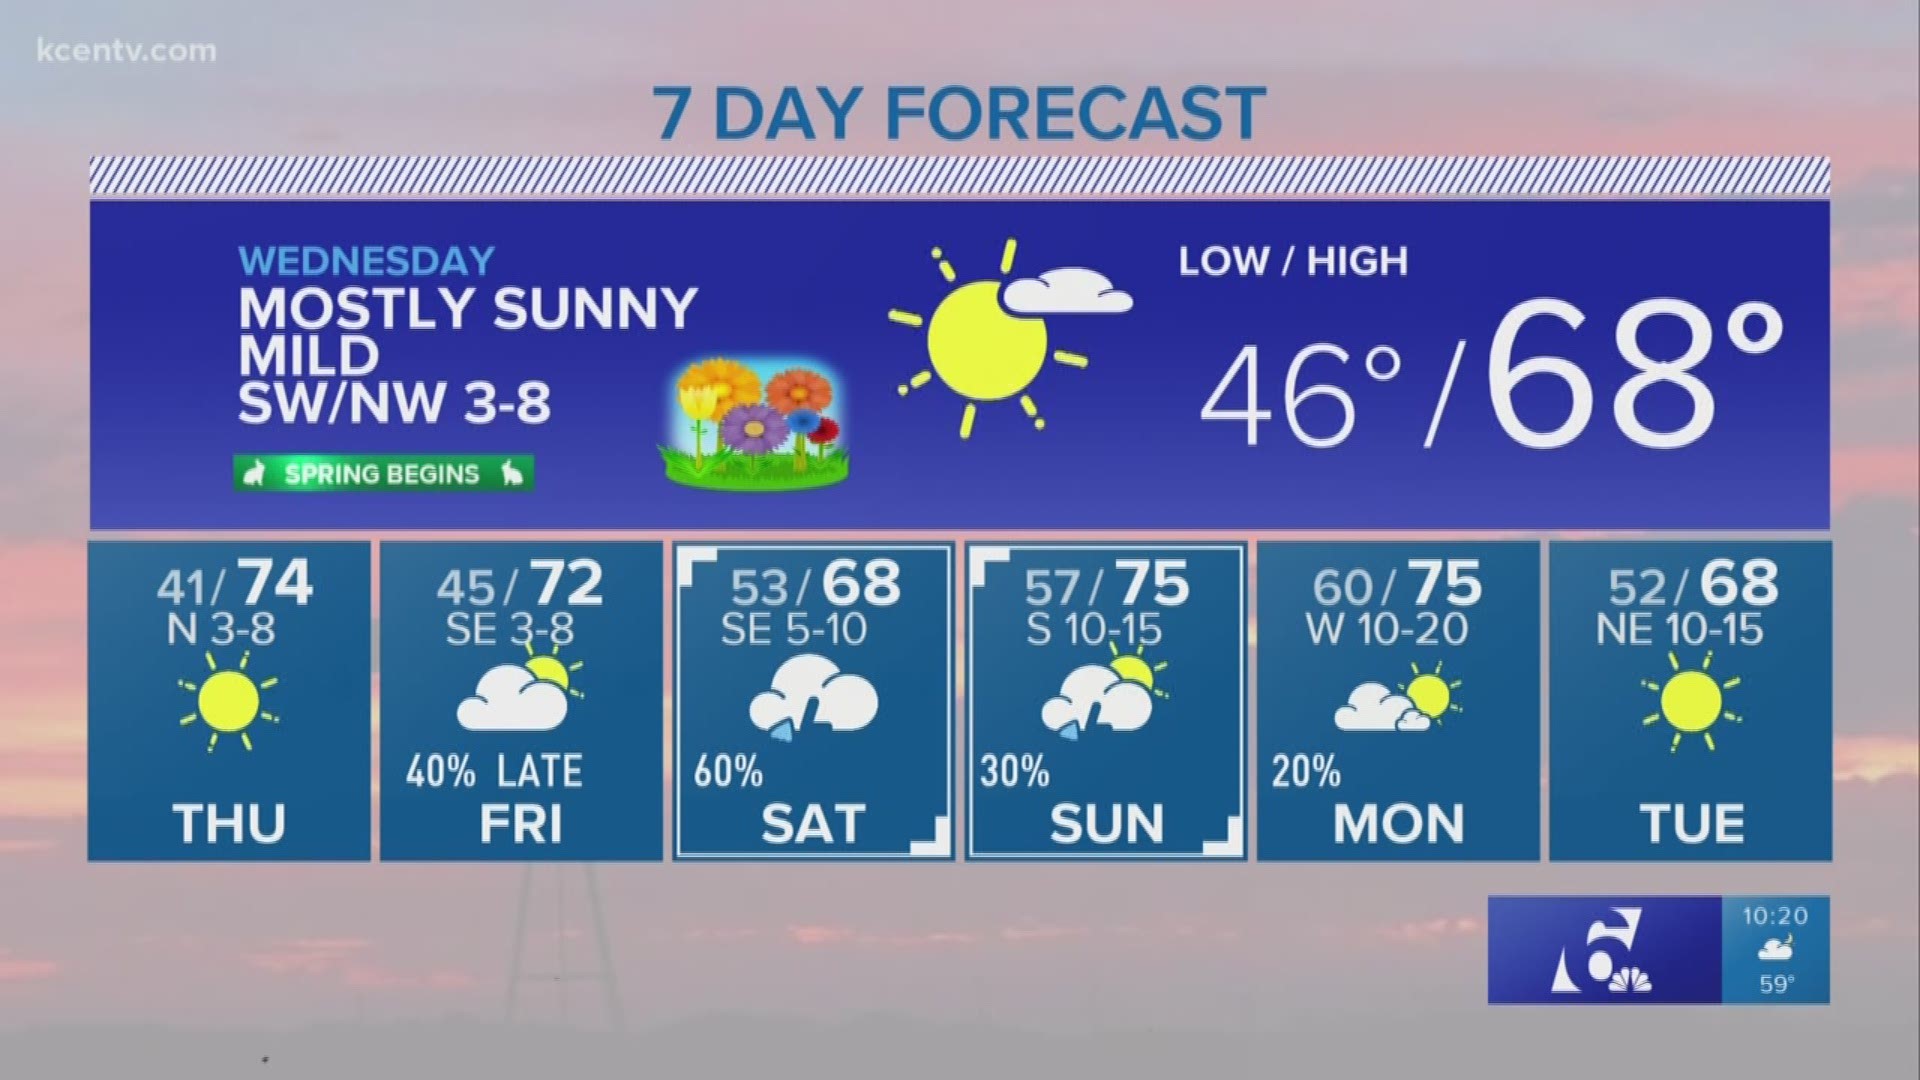 Although the next few days will be nice, chief meteorologist Andy Andersen says rain is on the way for the weekend.